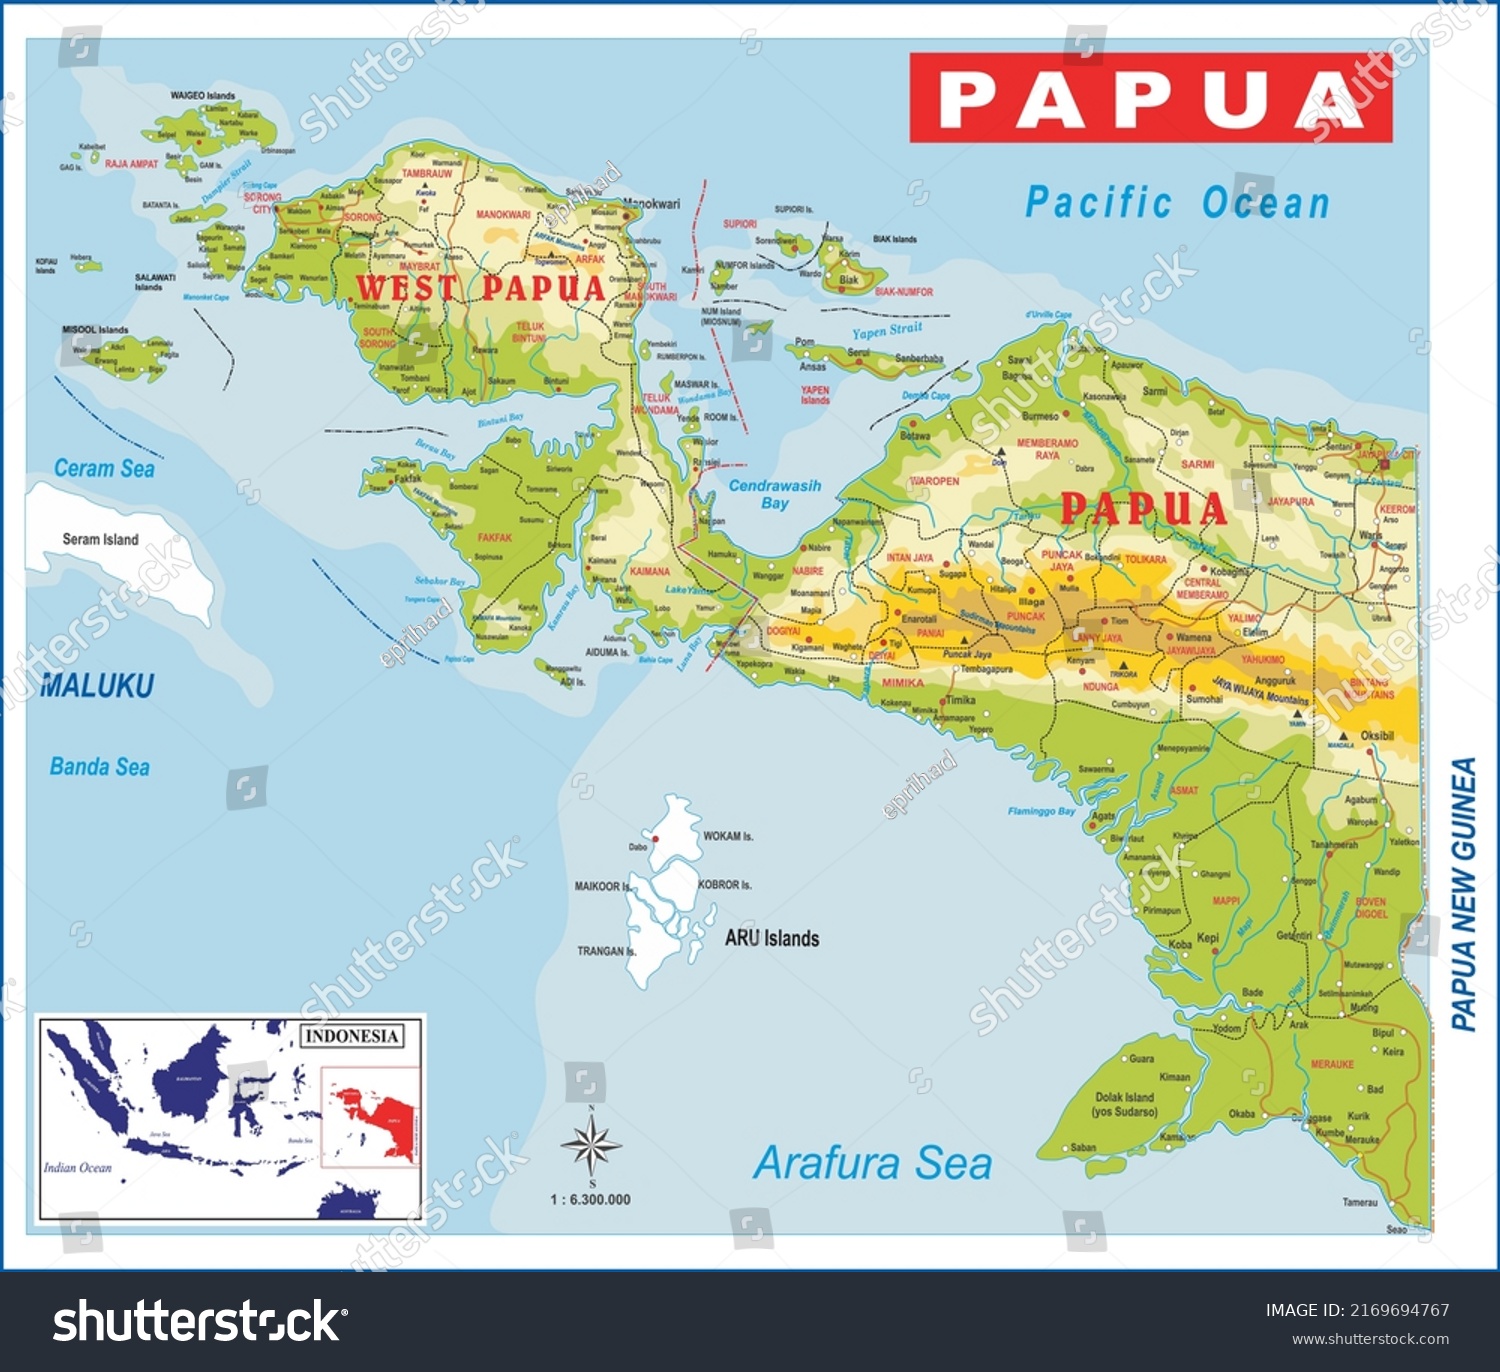 Stock Vector Map Of Papua Indonesia With Two Provinces West Papua And Papua 2169694767 